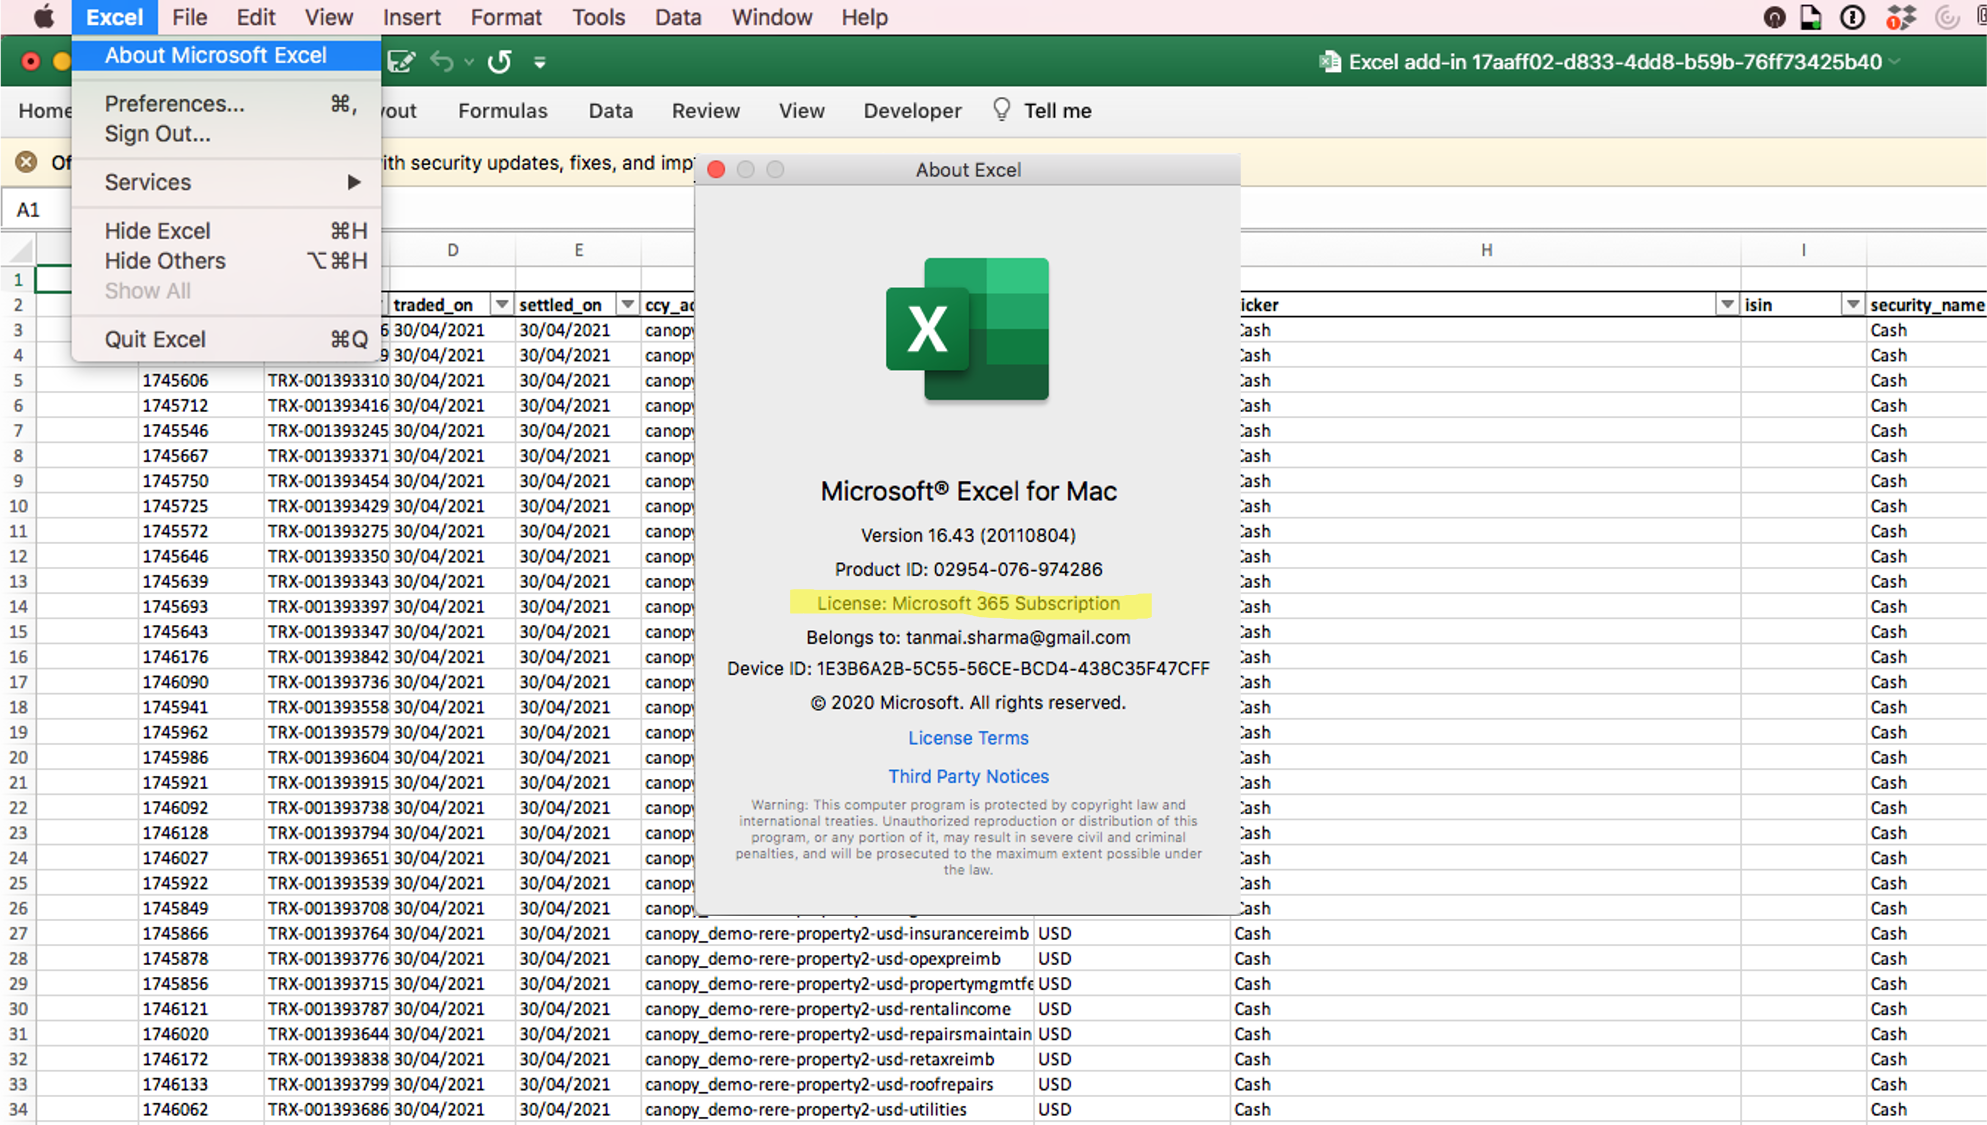 You should be able to see a Microsoft 365 license on your Excel for Mac